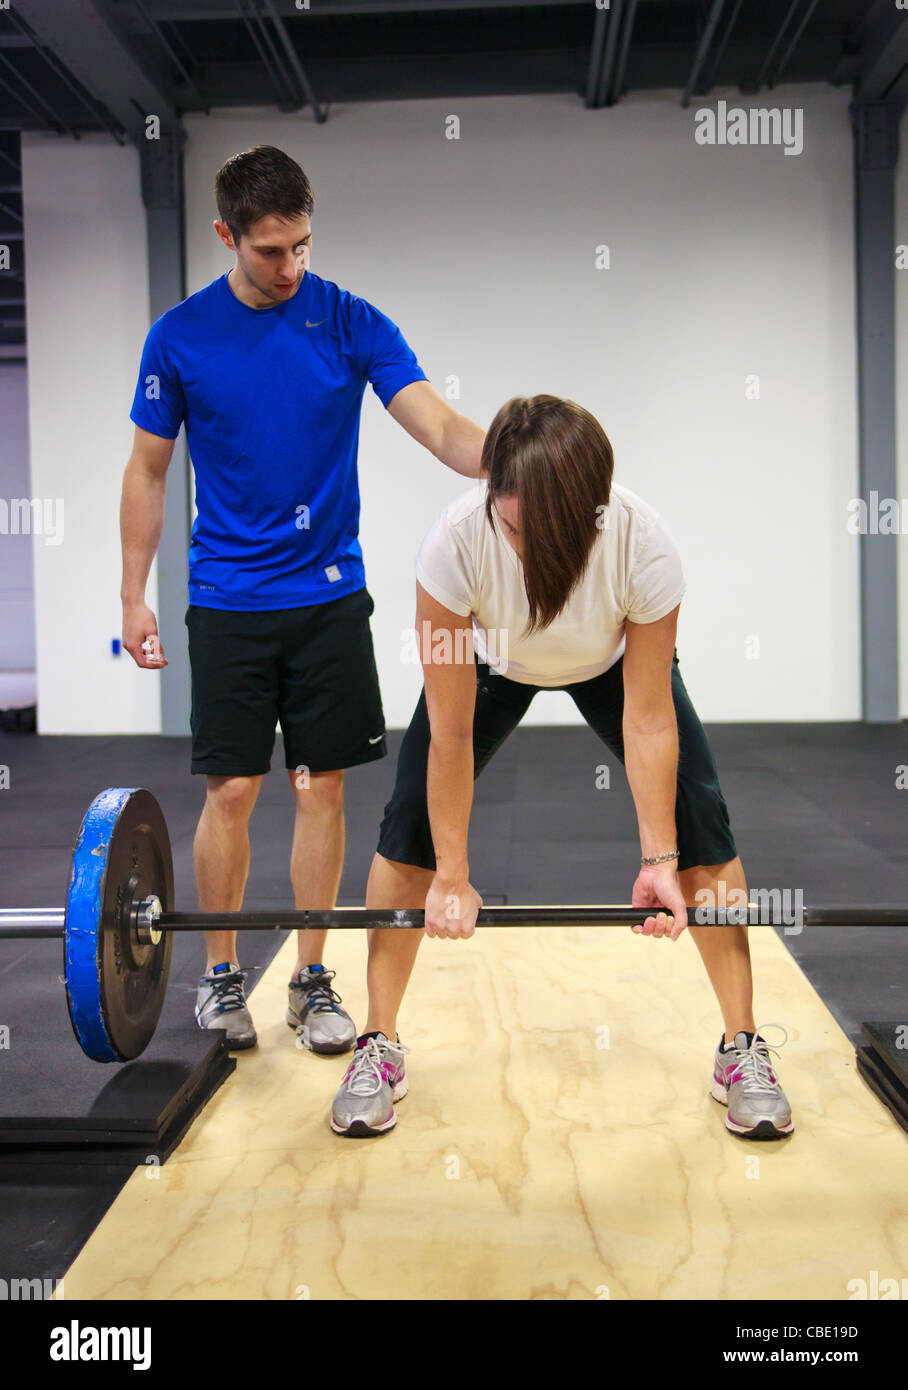 Male personal trainer coaching woman at lifting barbell weights. Stock Photo